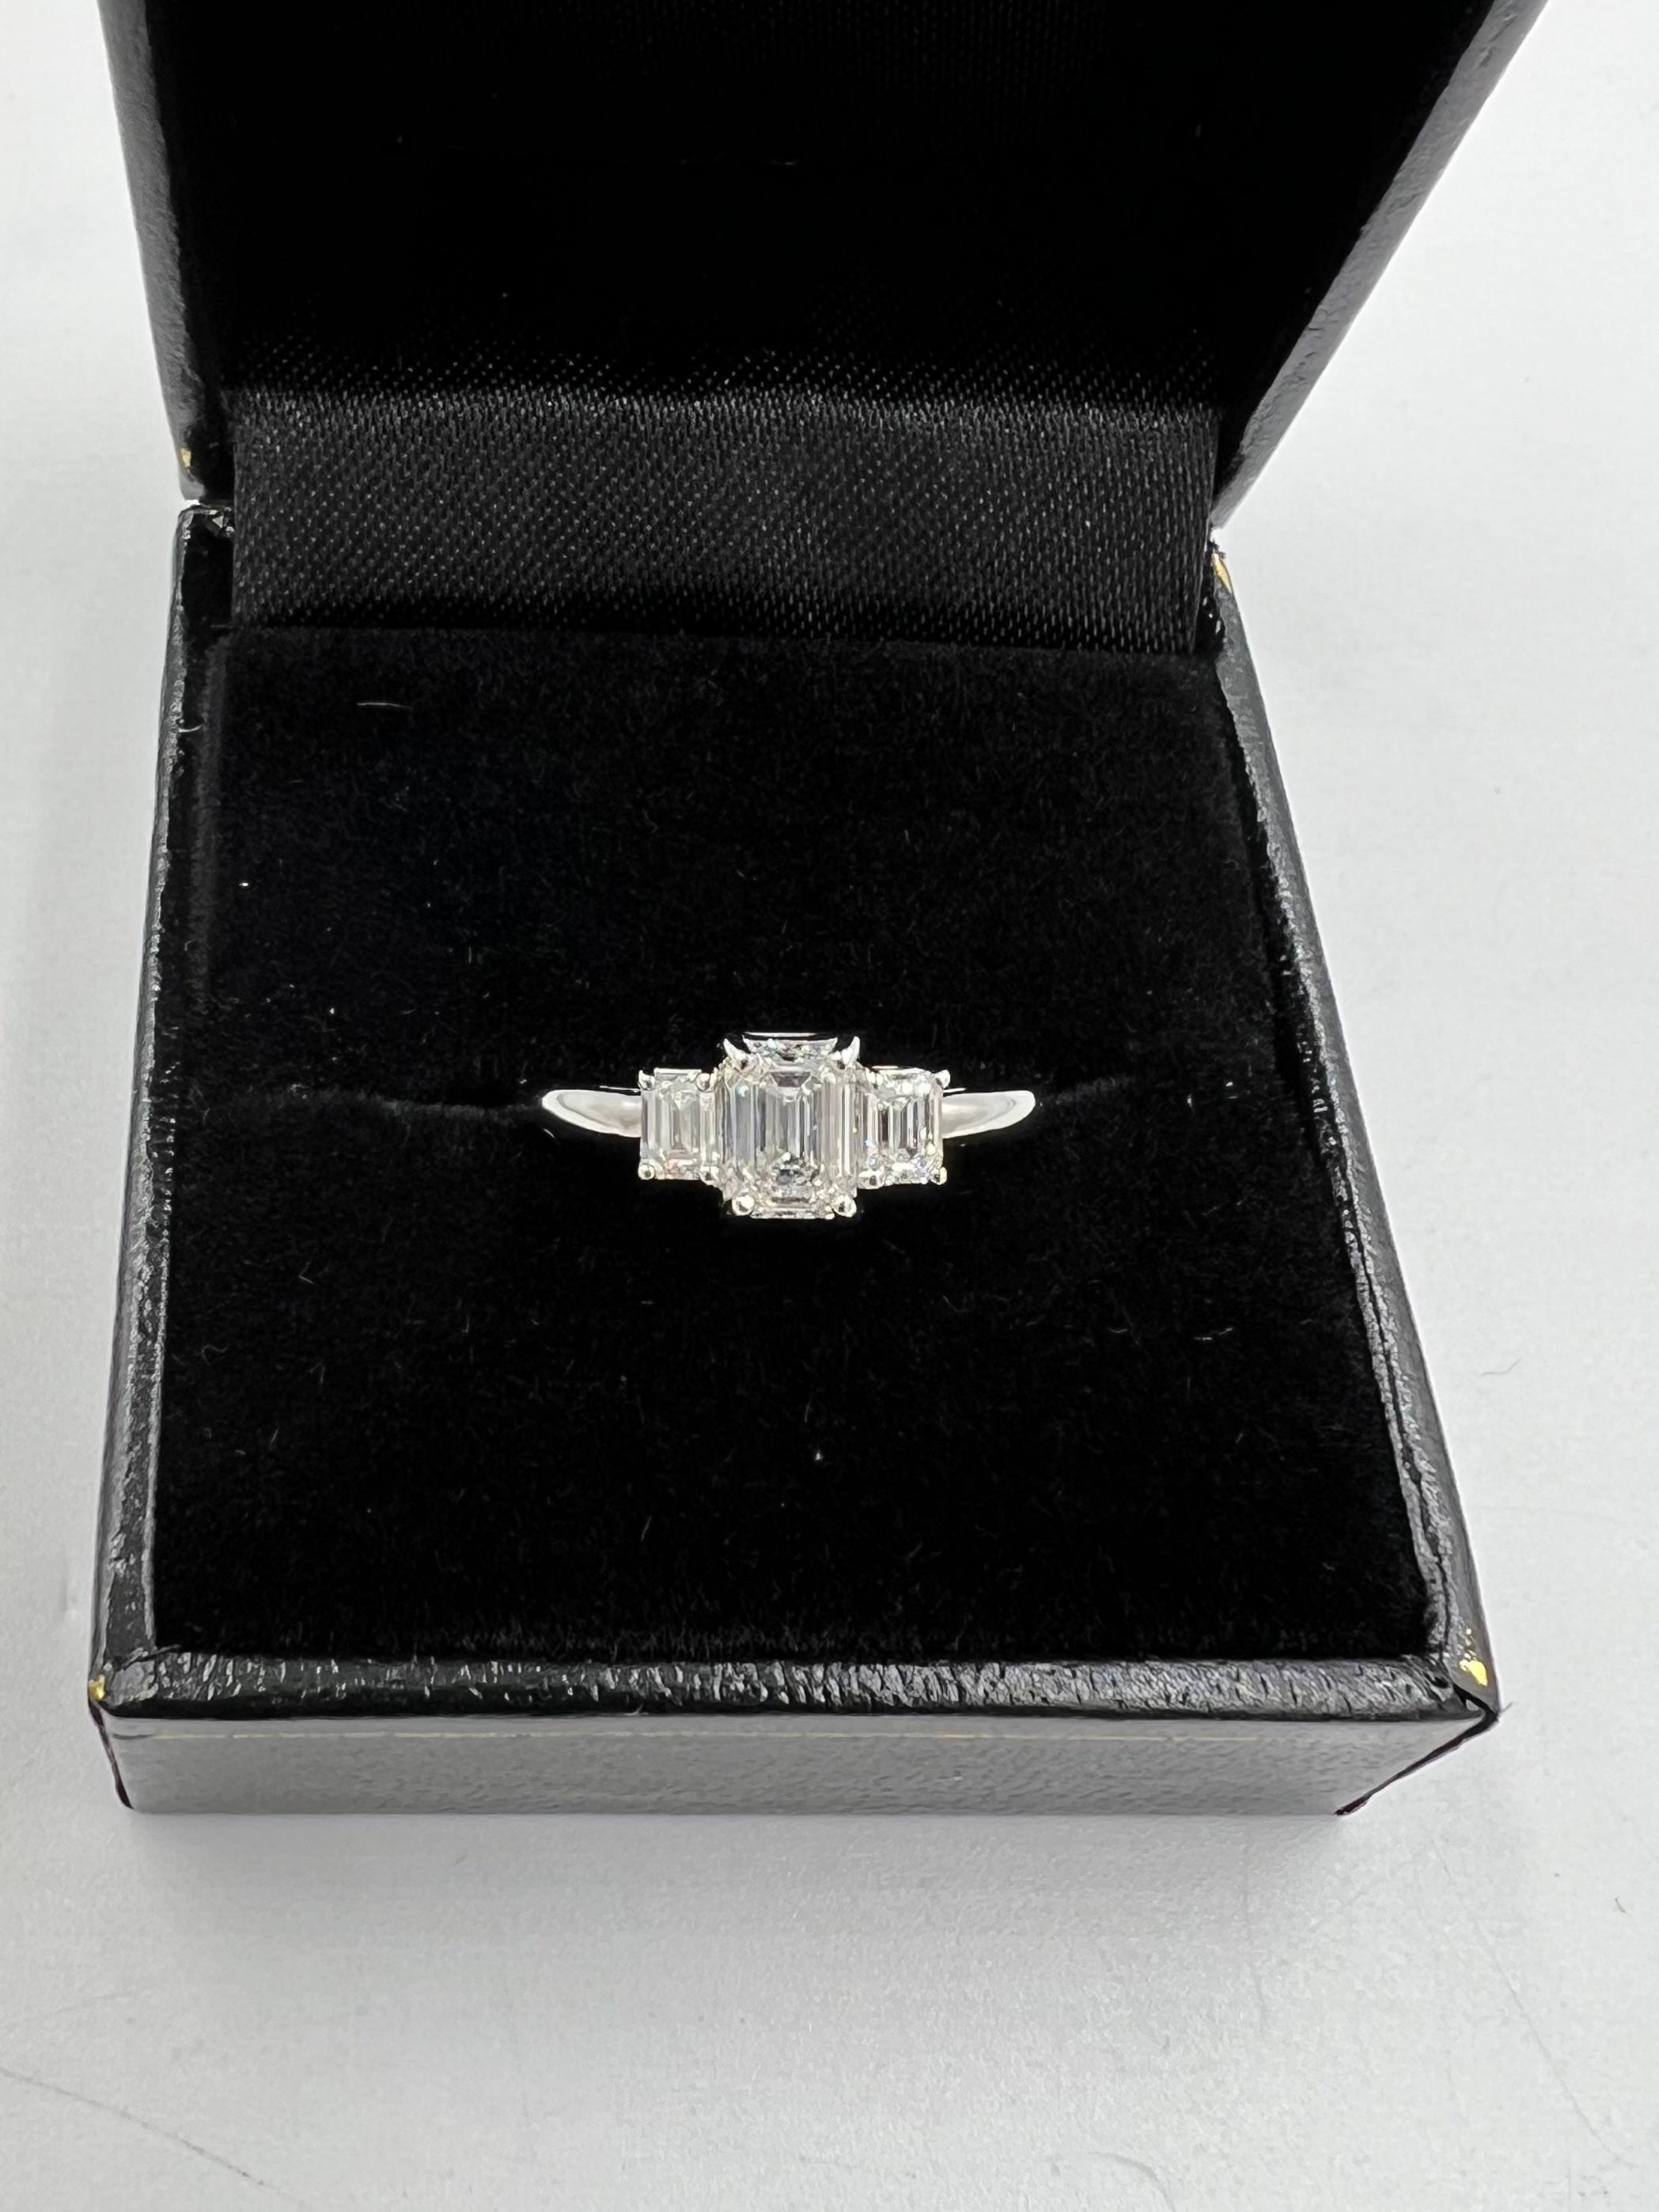 Emerald-cut diamond three-stone platinum ring, ca 1990s

The emerald-cut diamond three-stone platinum ring is a timeless symbol of elegance and sophistication. Crafted with precision and care, this exquisite piece of jewelry showcases the beauty and